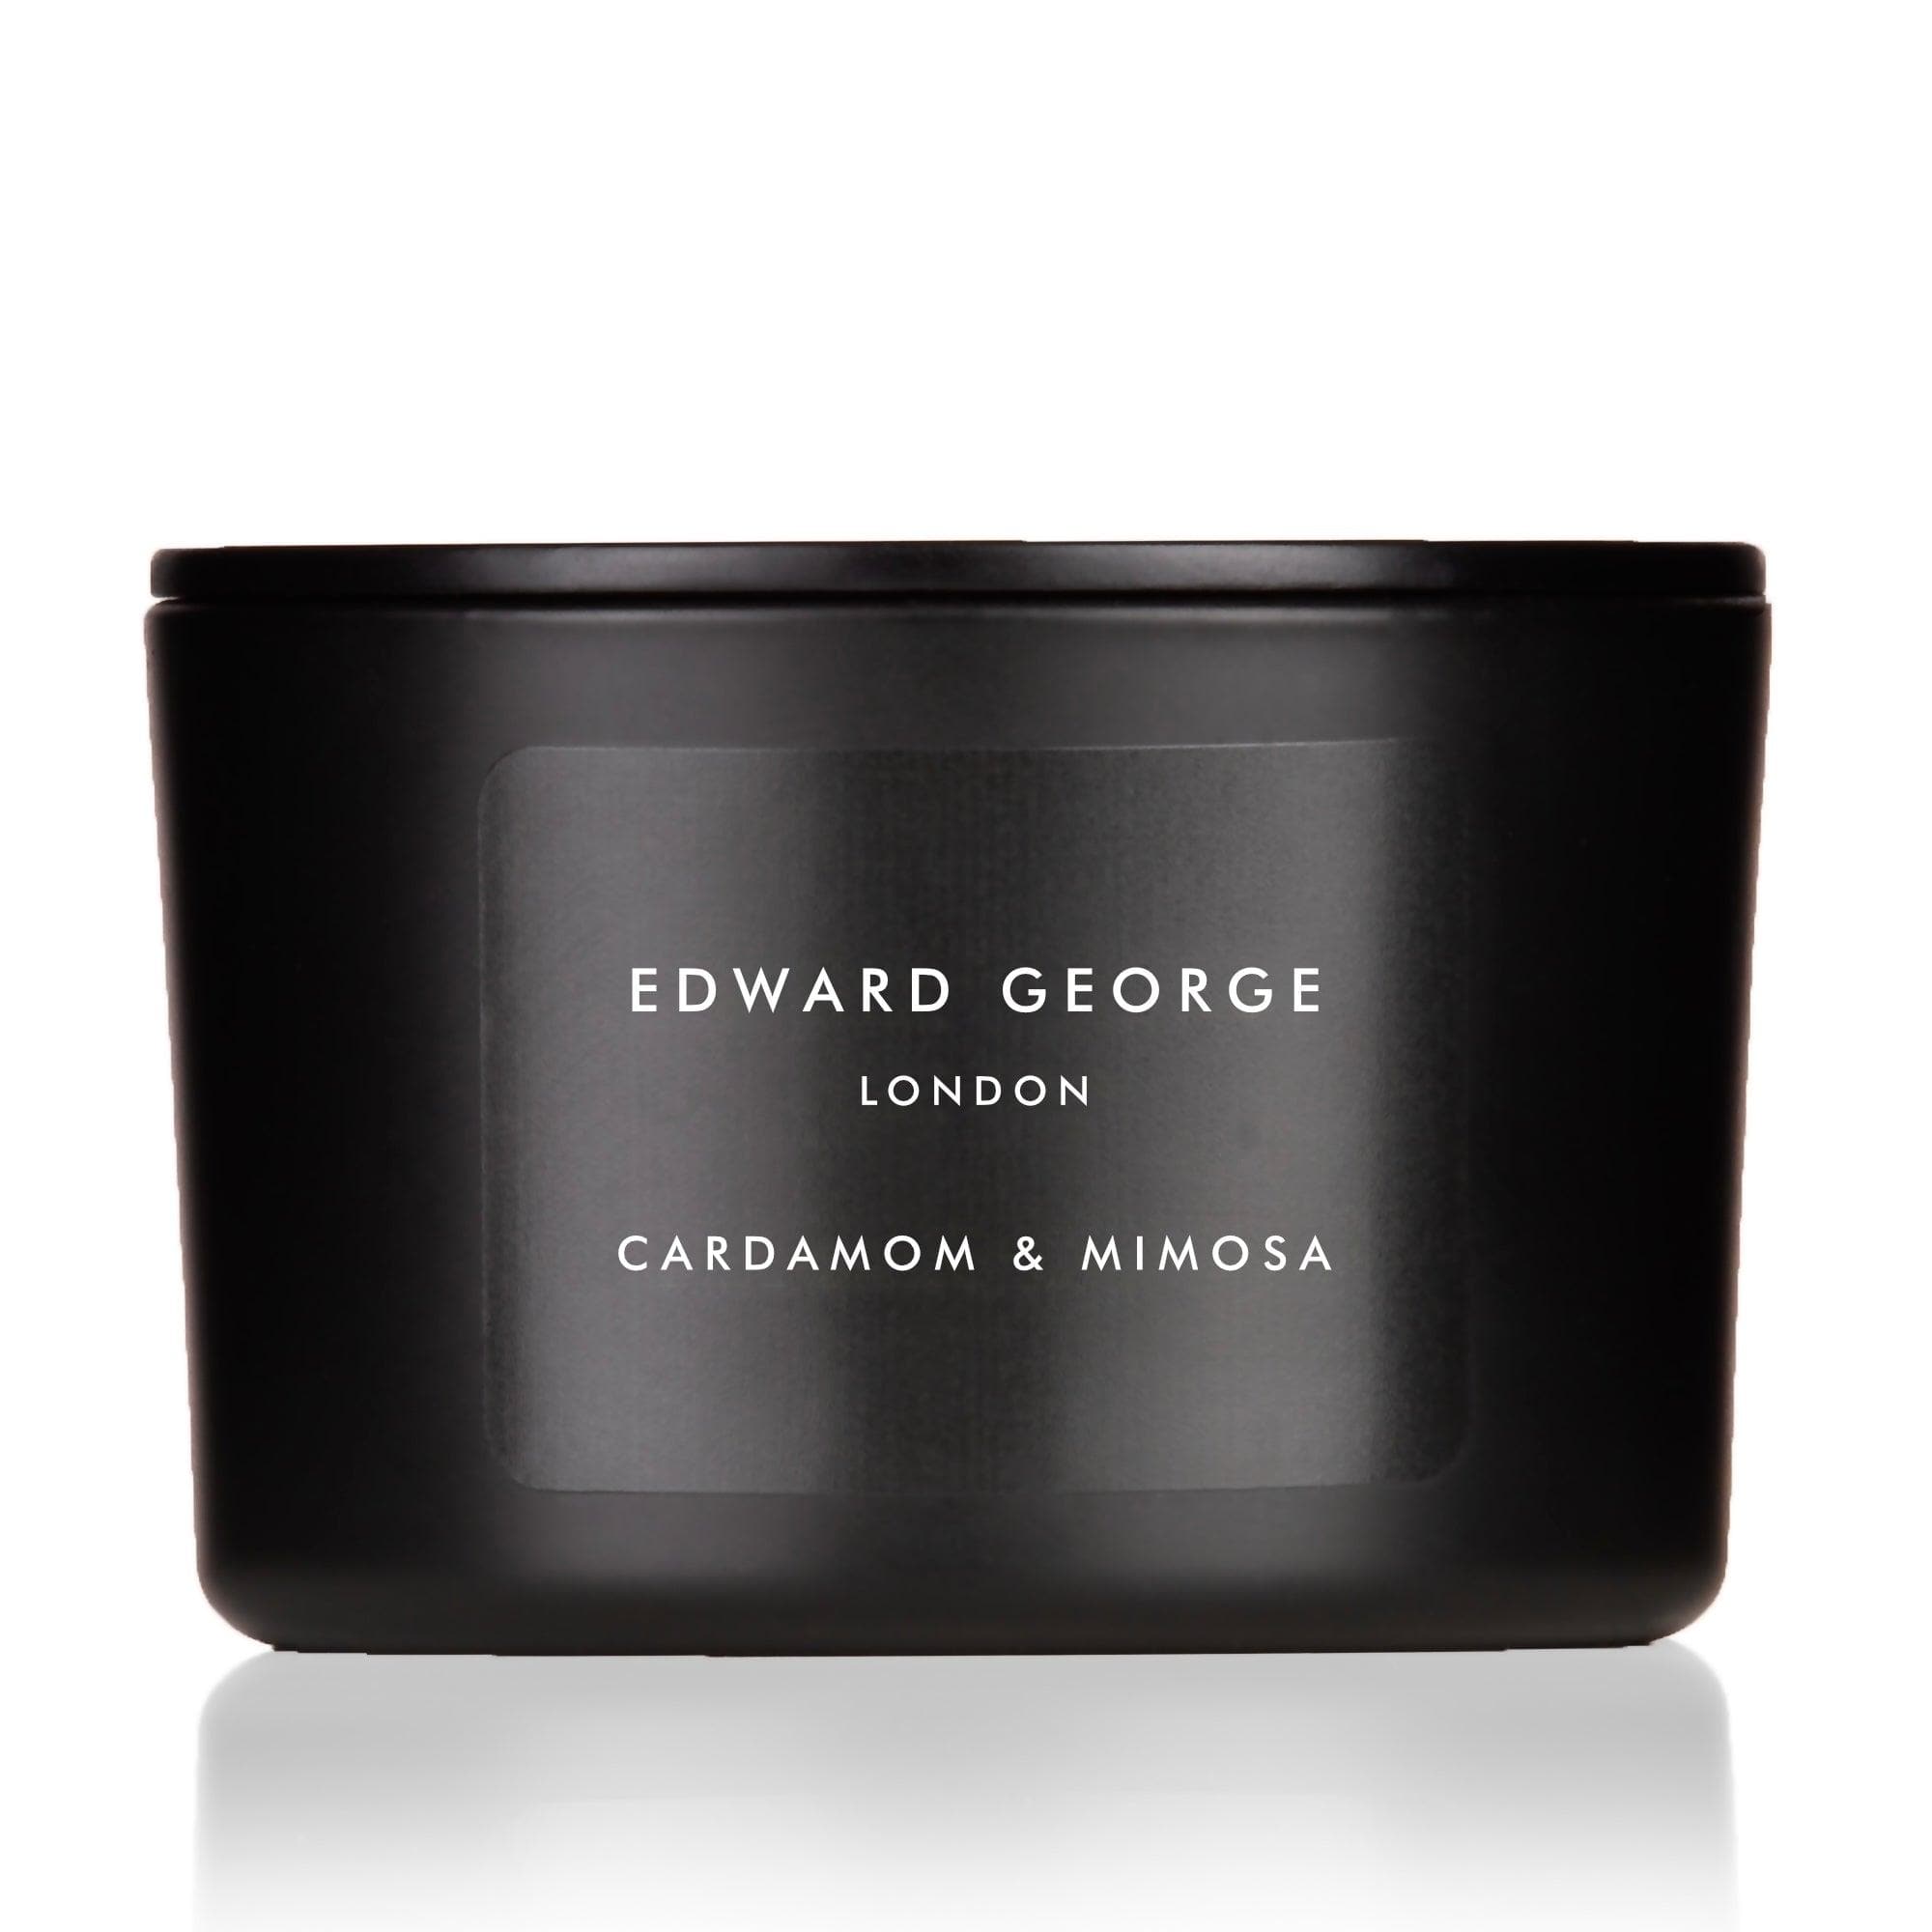 cardamom-mimosa-candles-home-fragrance-decor-room-living-room-edward-george-london-luxury-gift-ritual-scent-set-lid-zinc-alloy-black-wax-best-black-scented-candle-women-men-small